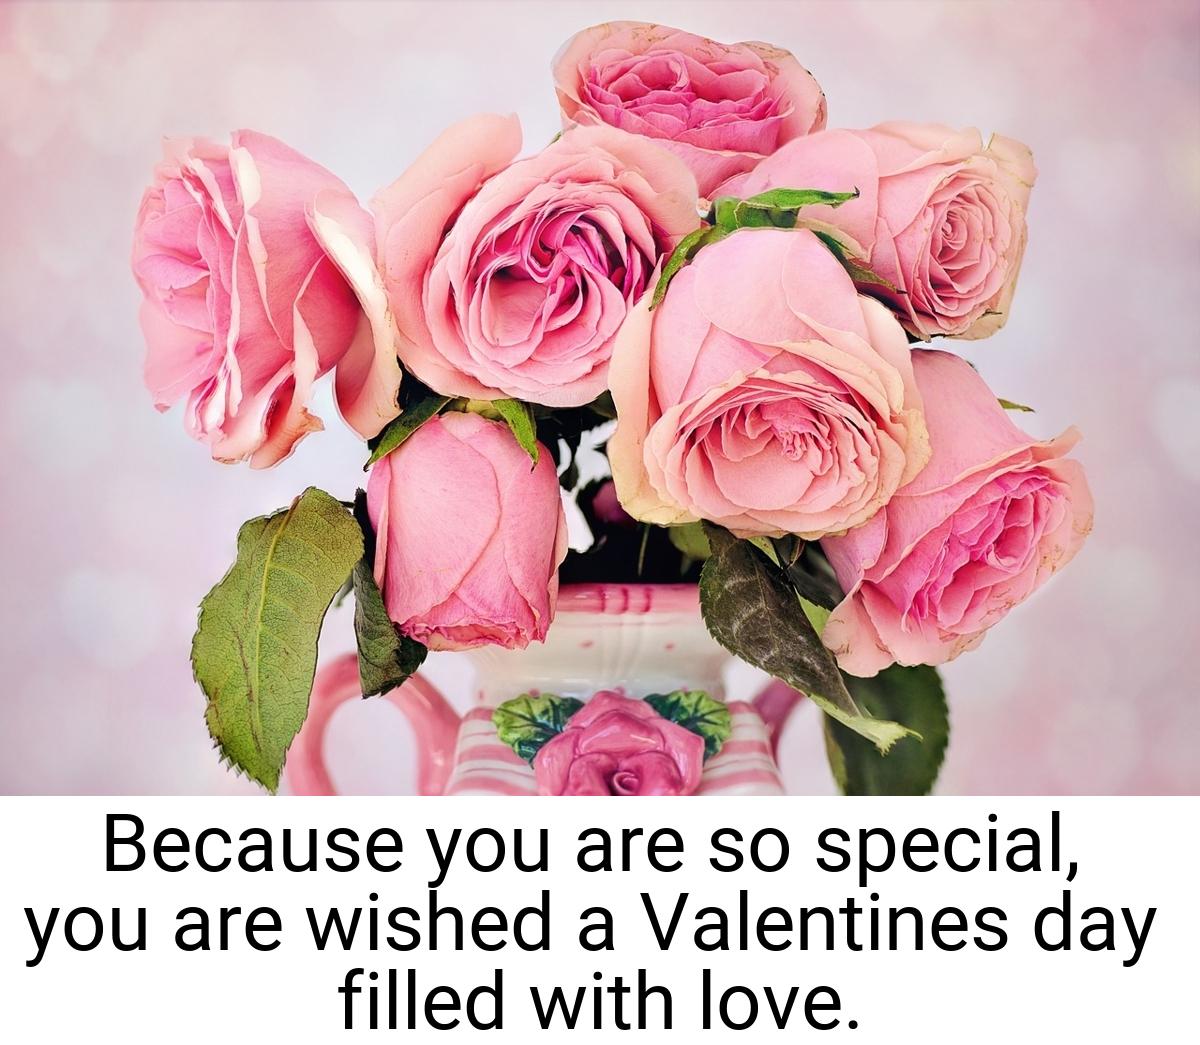 Because you are so special, you are wished a Valentines day